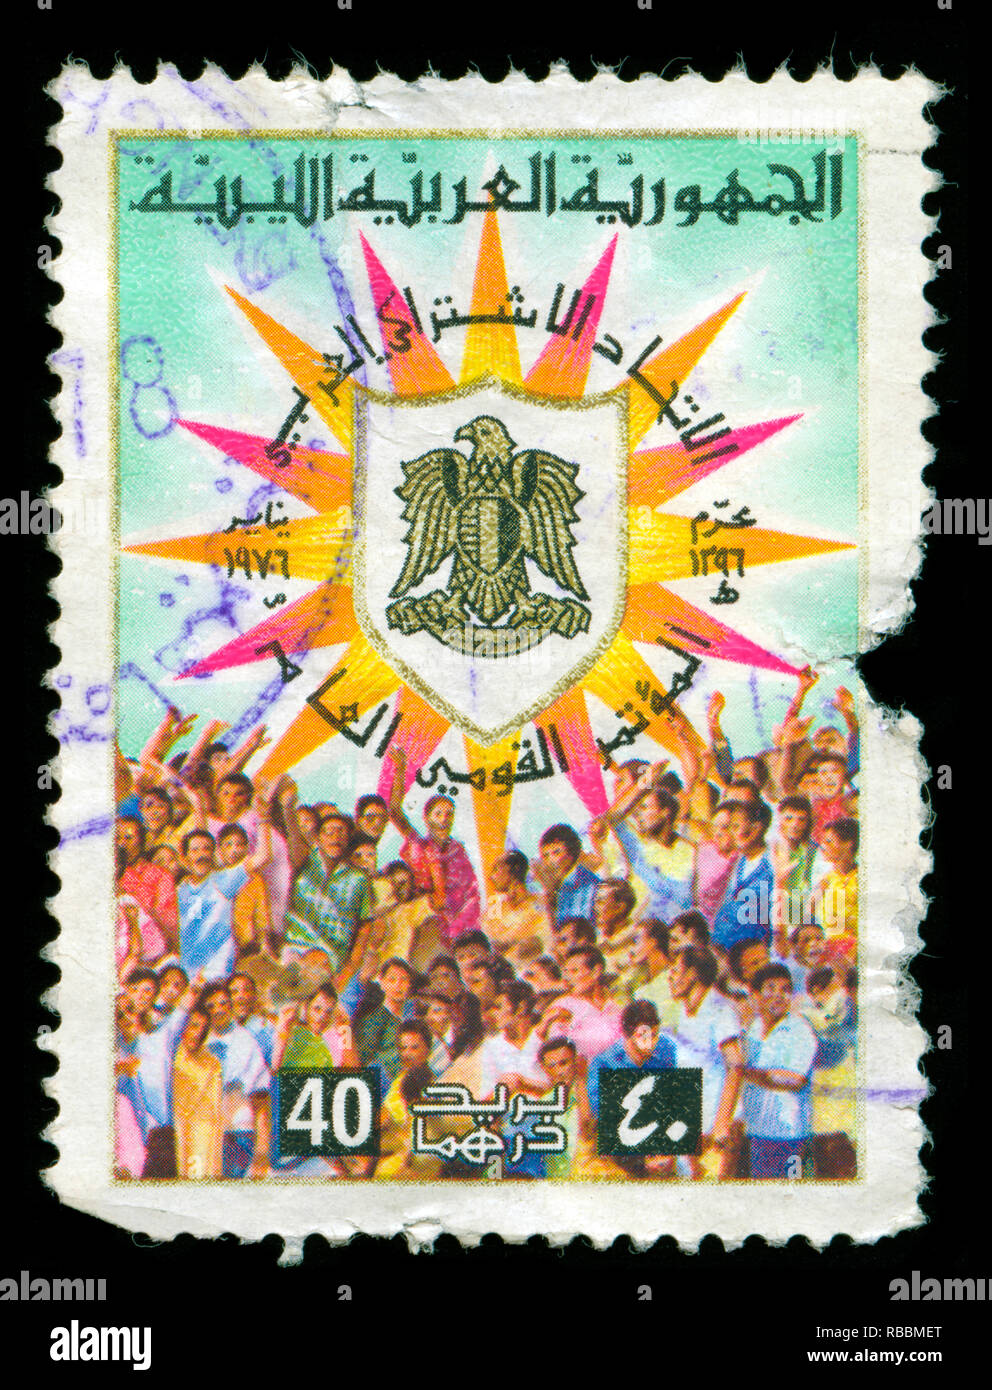 Postage stamp from Libya in the General National (People’s) Congress series issued in 1976 Stock Photo